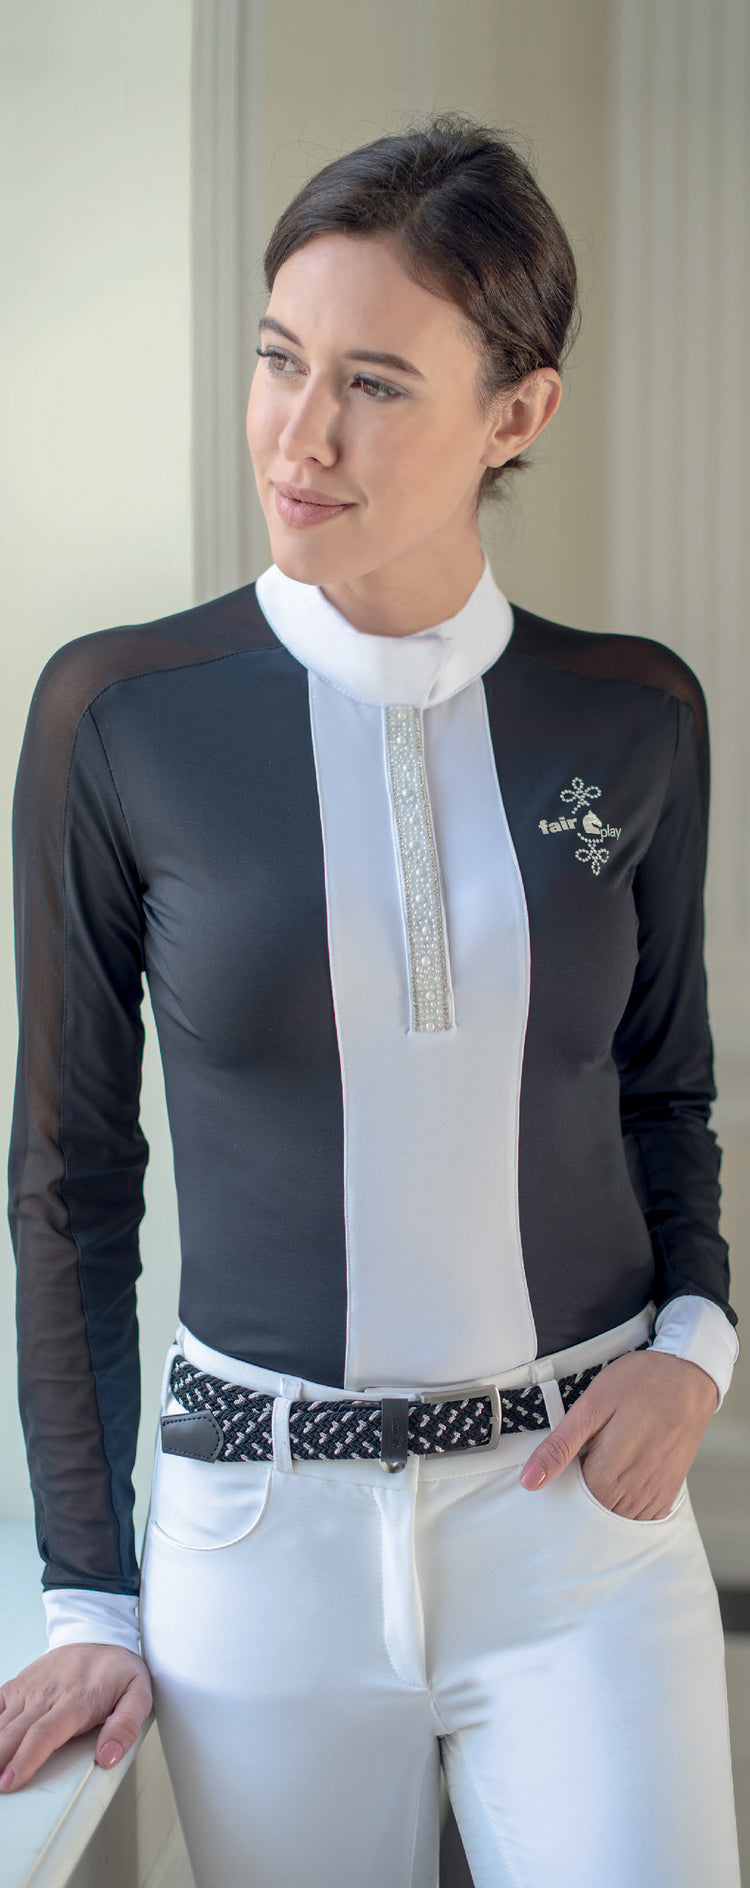 Black show shirt with see-through sleeves